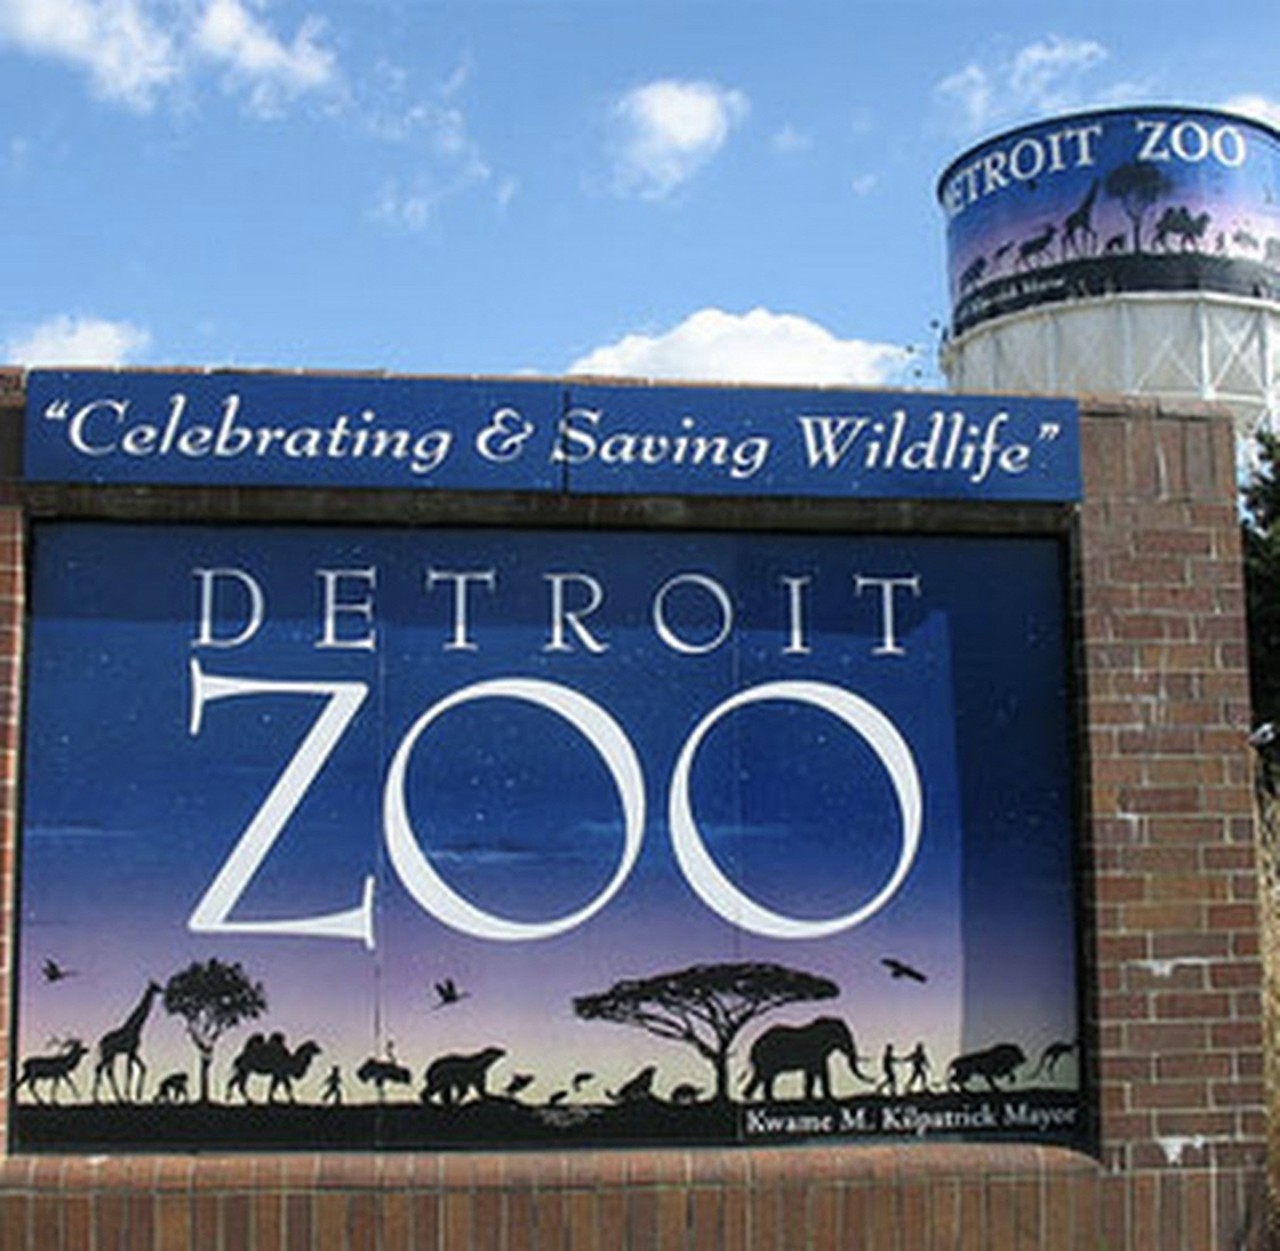 Detroit Zoo
8450 W. 10 Mile Rd., Royal Oak; 248-541-5717; detroitzoo.org
Hear us out, you may think the zoo is only for school field trips but it’s very much a date night destination as well. Aside from a regular afternoon at the zoo, the zoo hosts curated evening events, and some are even 21+.